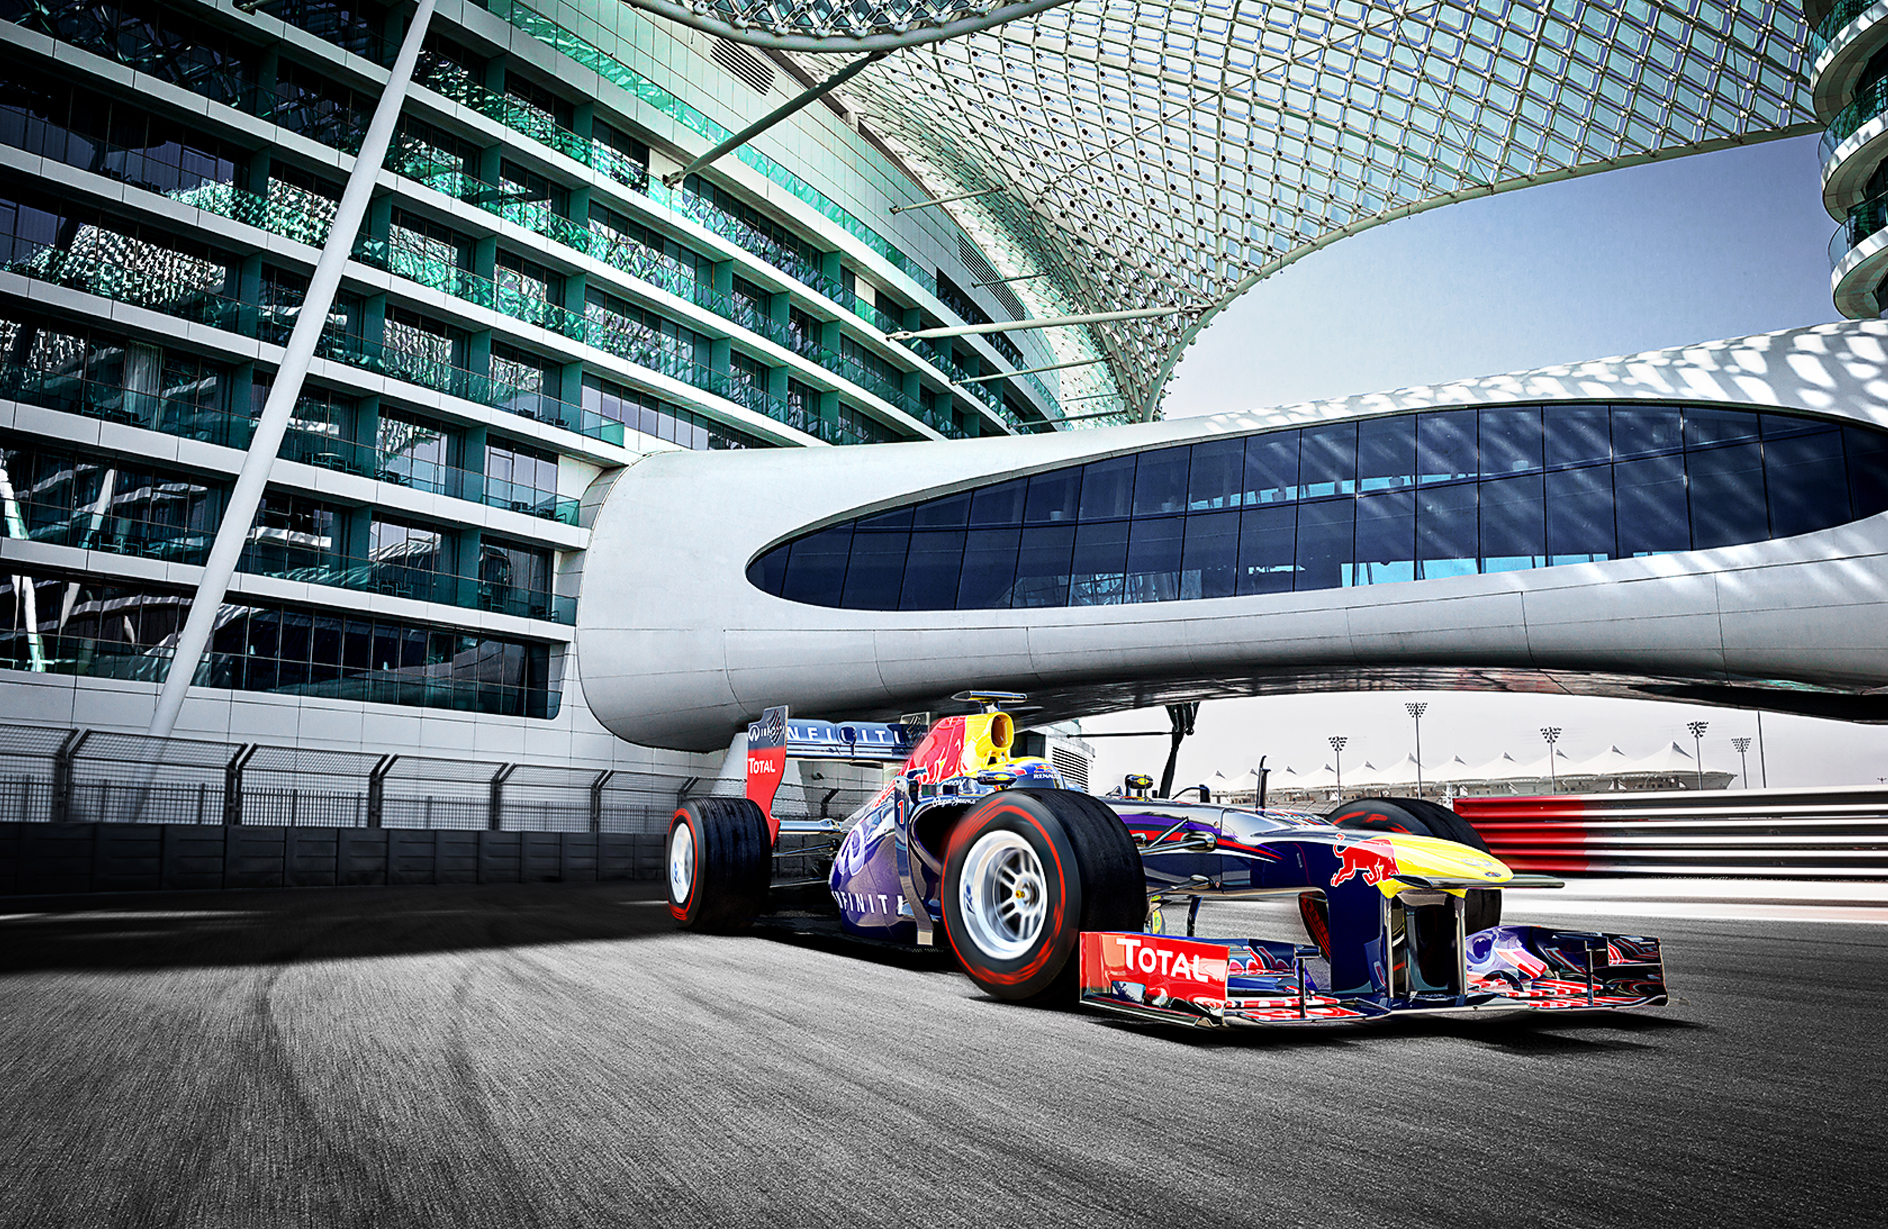 2D Red Bull Formula One Racing Photo Retouch Illustration